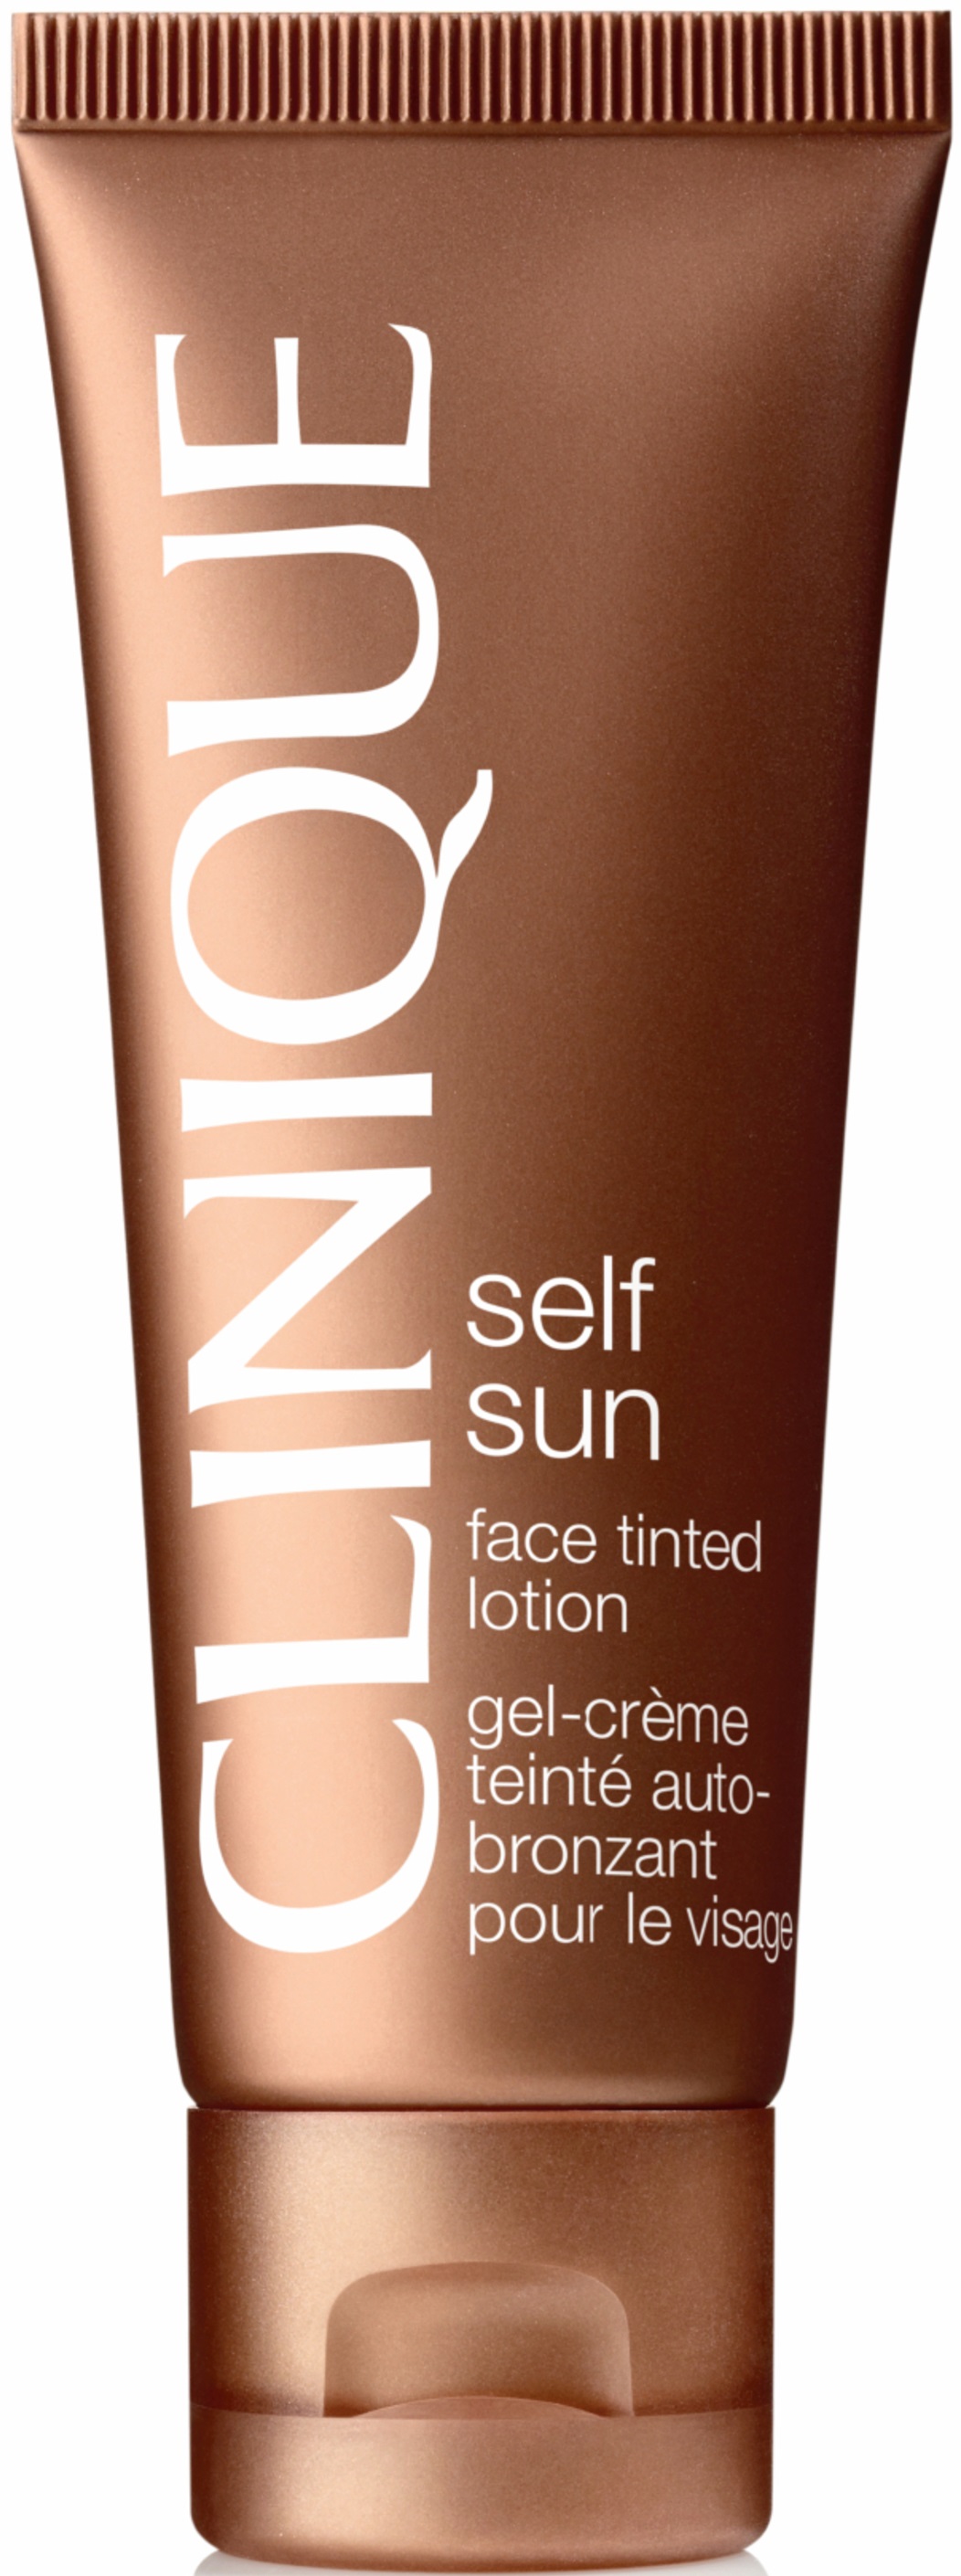 Clinique Self Face Tinted Lotion 50 ml |